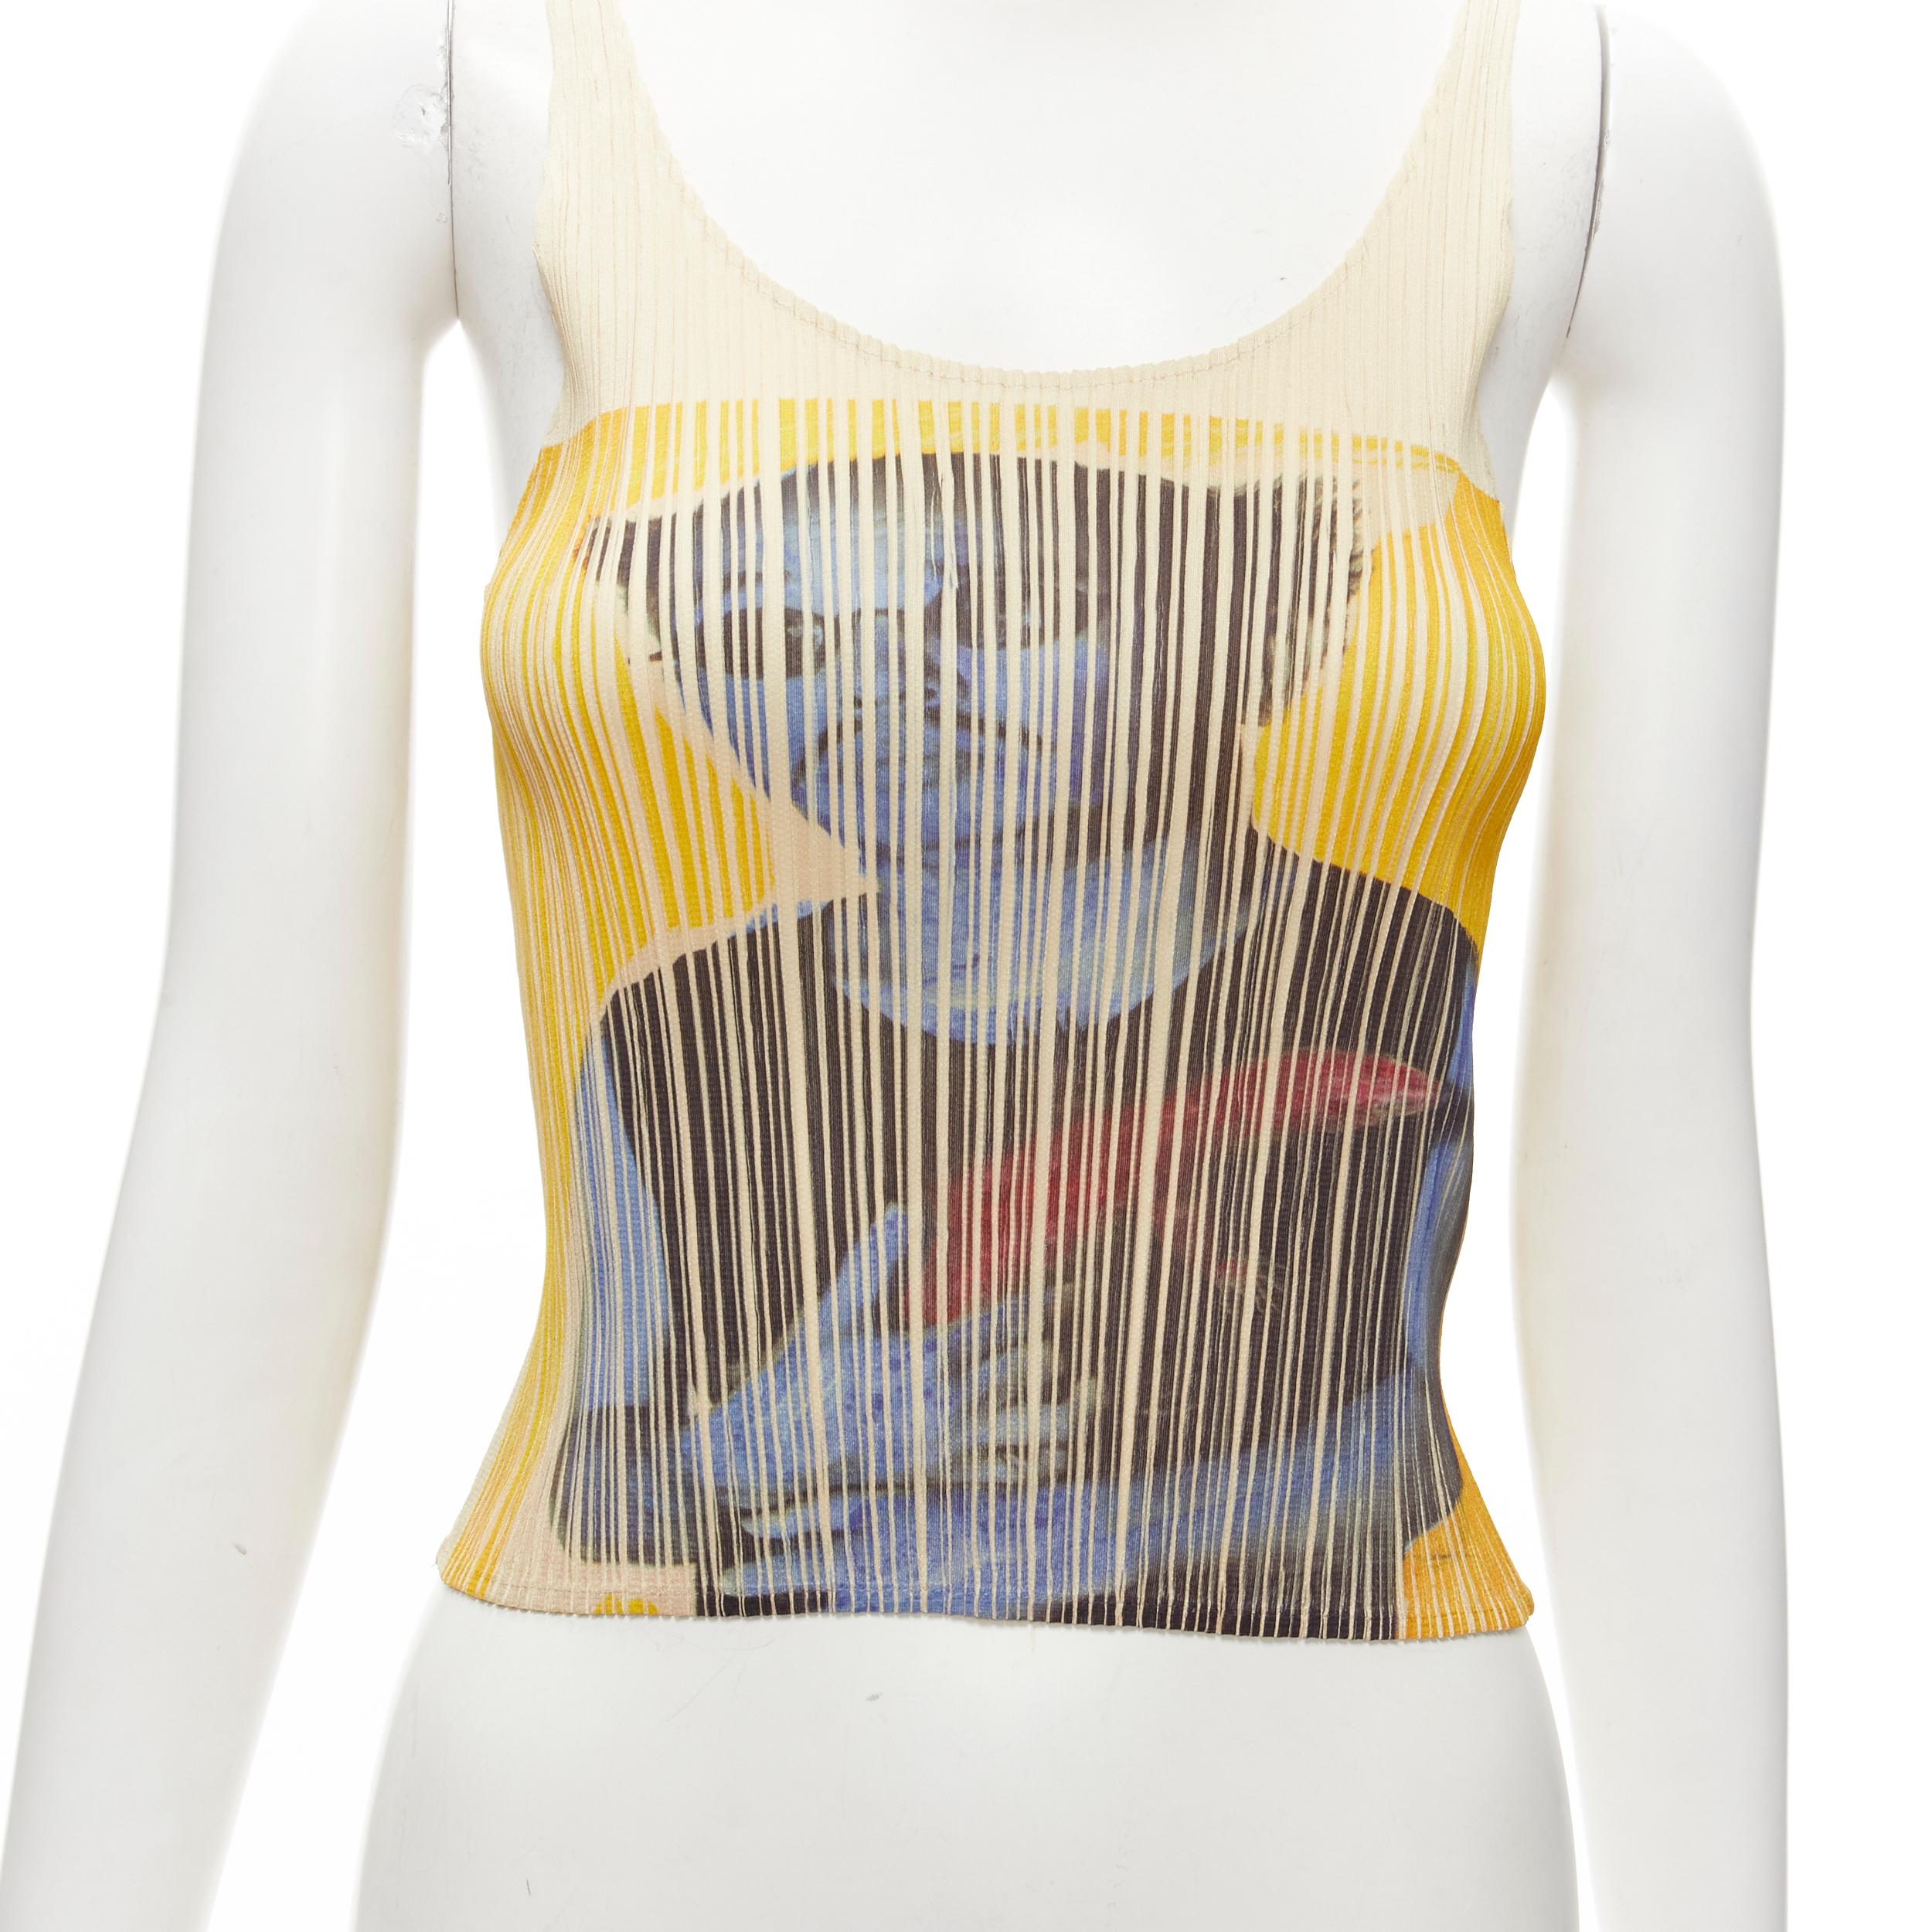 rare ISSEY MIYAKE PLEATS PLEASE NOBUYOSHI ARAKI print pleated tank top
Reference: TGAS/C01667
Brand: Issey Miyake
Collection: PLEATS PLEASE NOBUYOSHI ARAKI
Material: Polyester
Color: Multicolour
Pattern: Photographic Print
Closure: Elasticated
Made